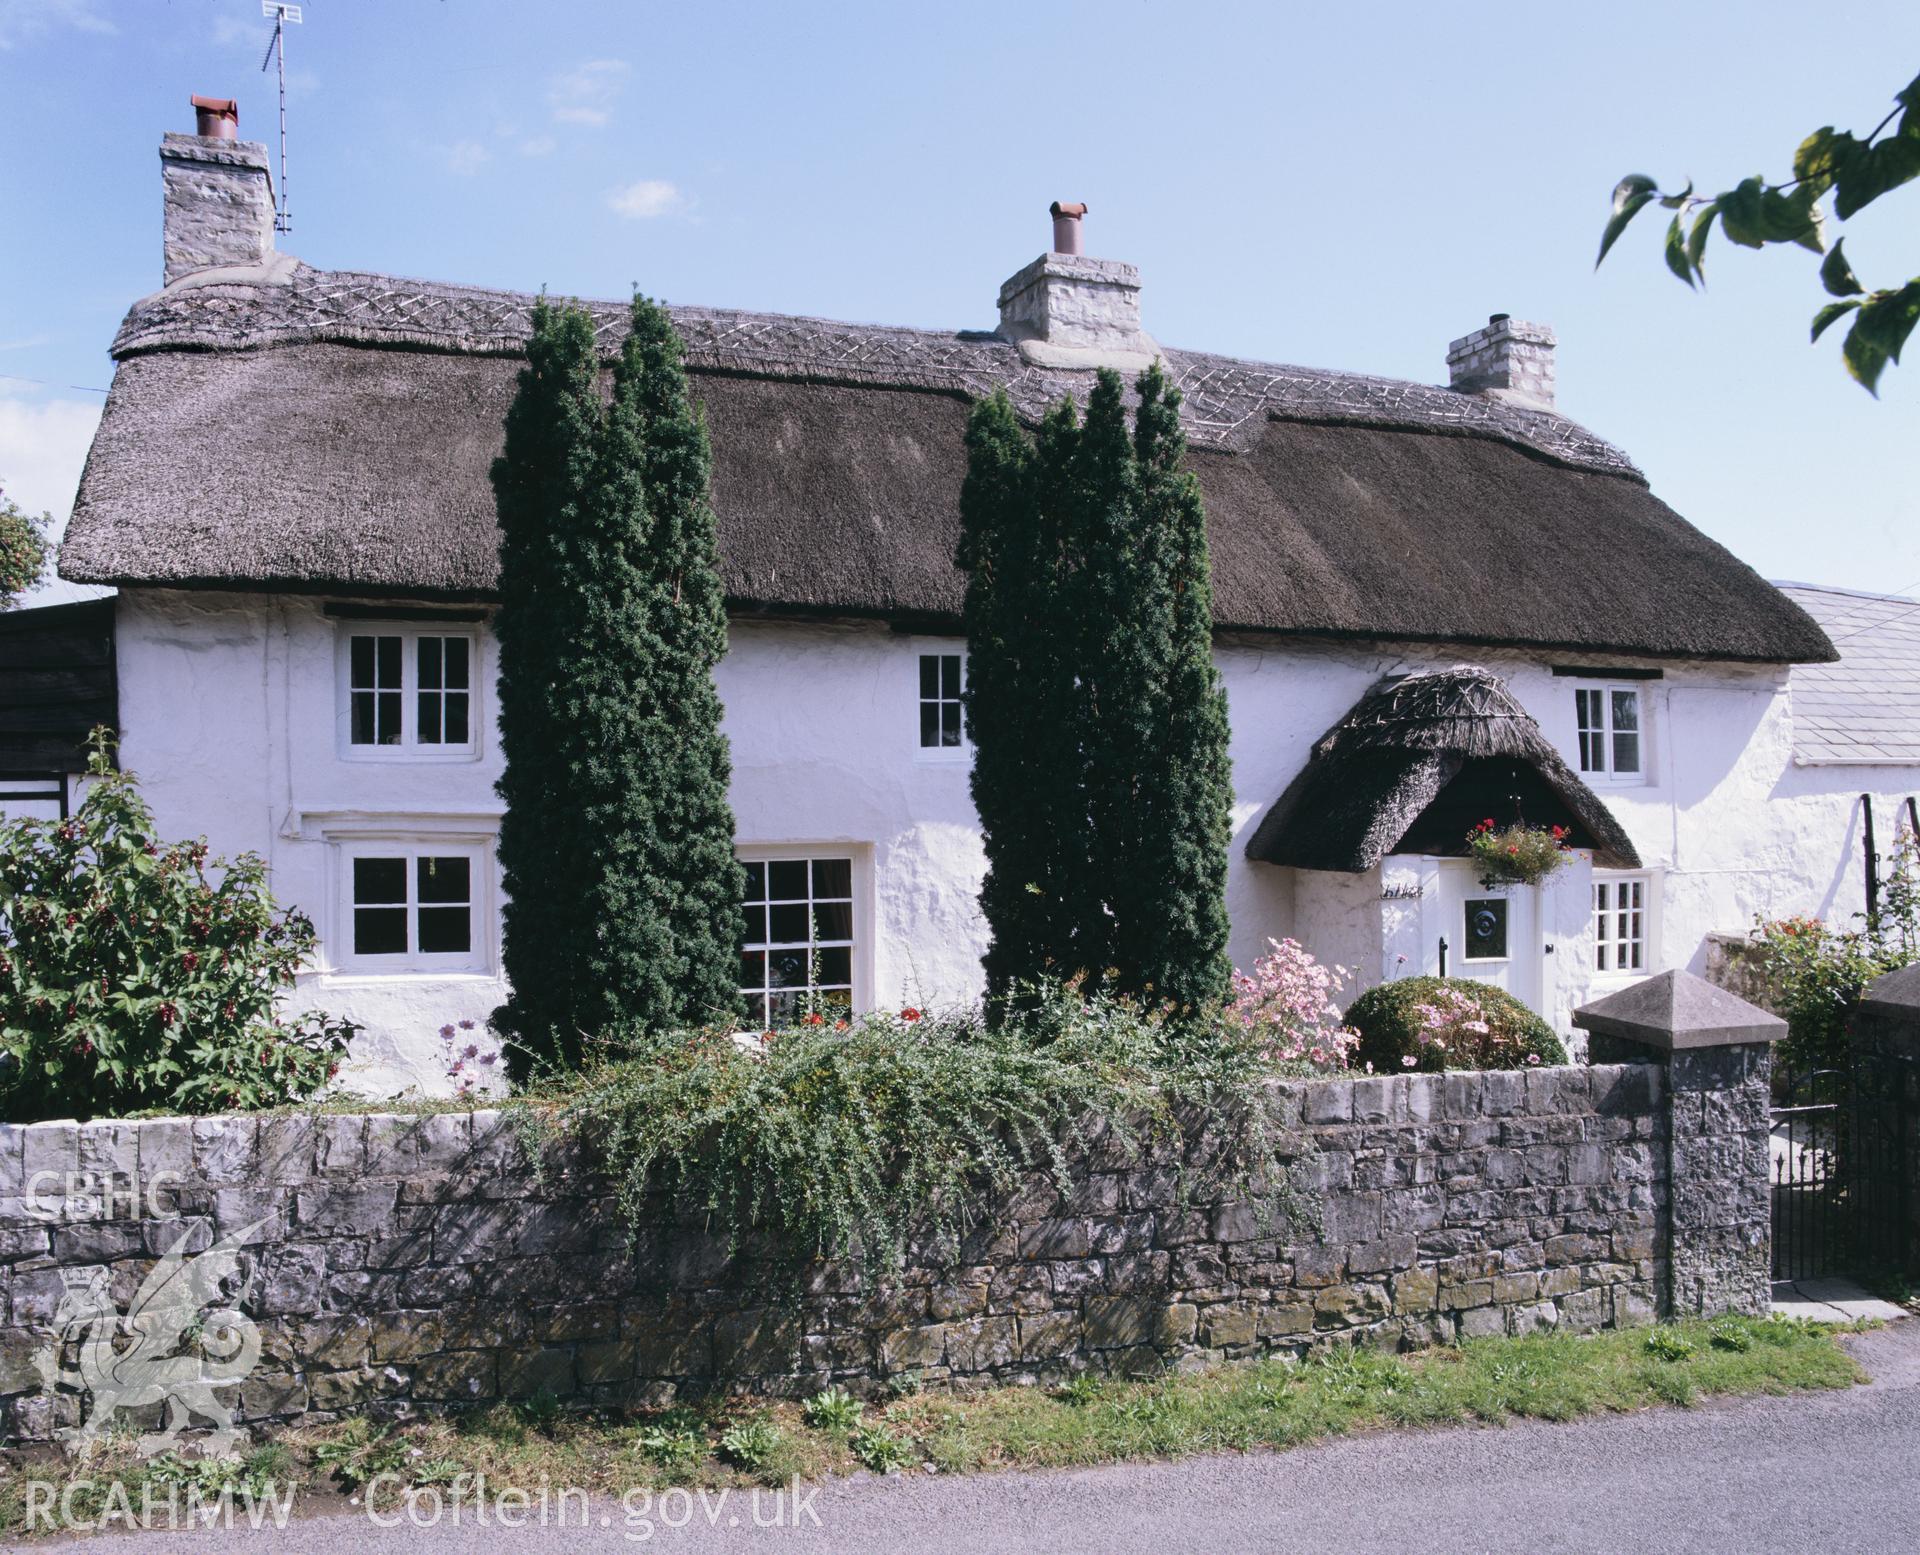 RCAHMW colour transparency of an exterior view of To-hesg, Llantwit Major.